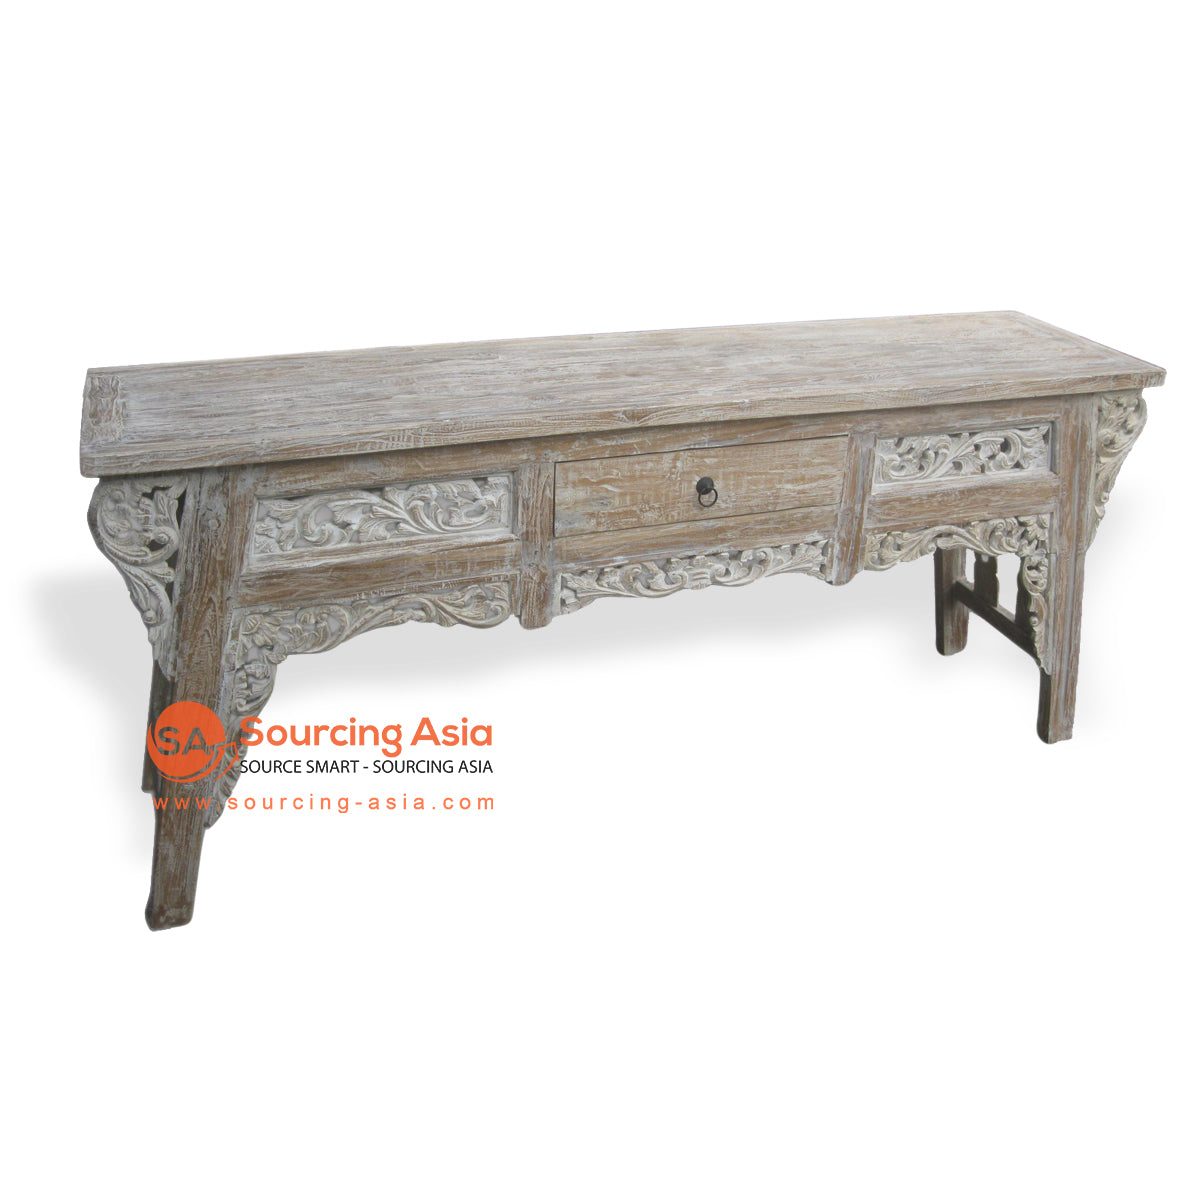 LAC022 RECYCLED TEAK WOOD ONE DRAWER CARVED CONSOLE TABLE